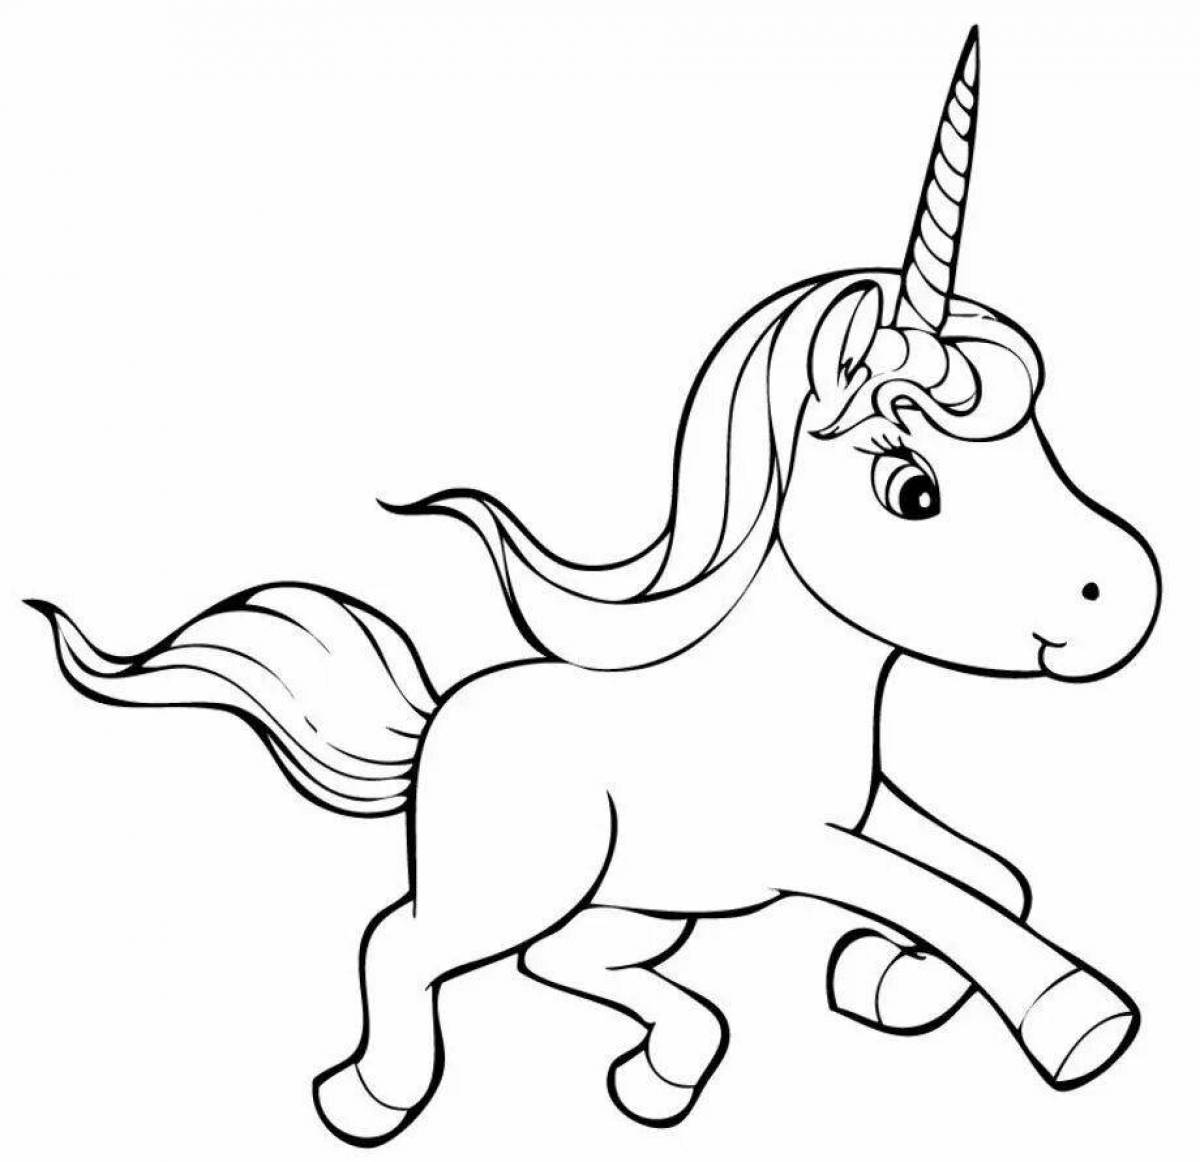 Cute unicorn coloring book for kids